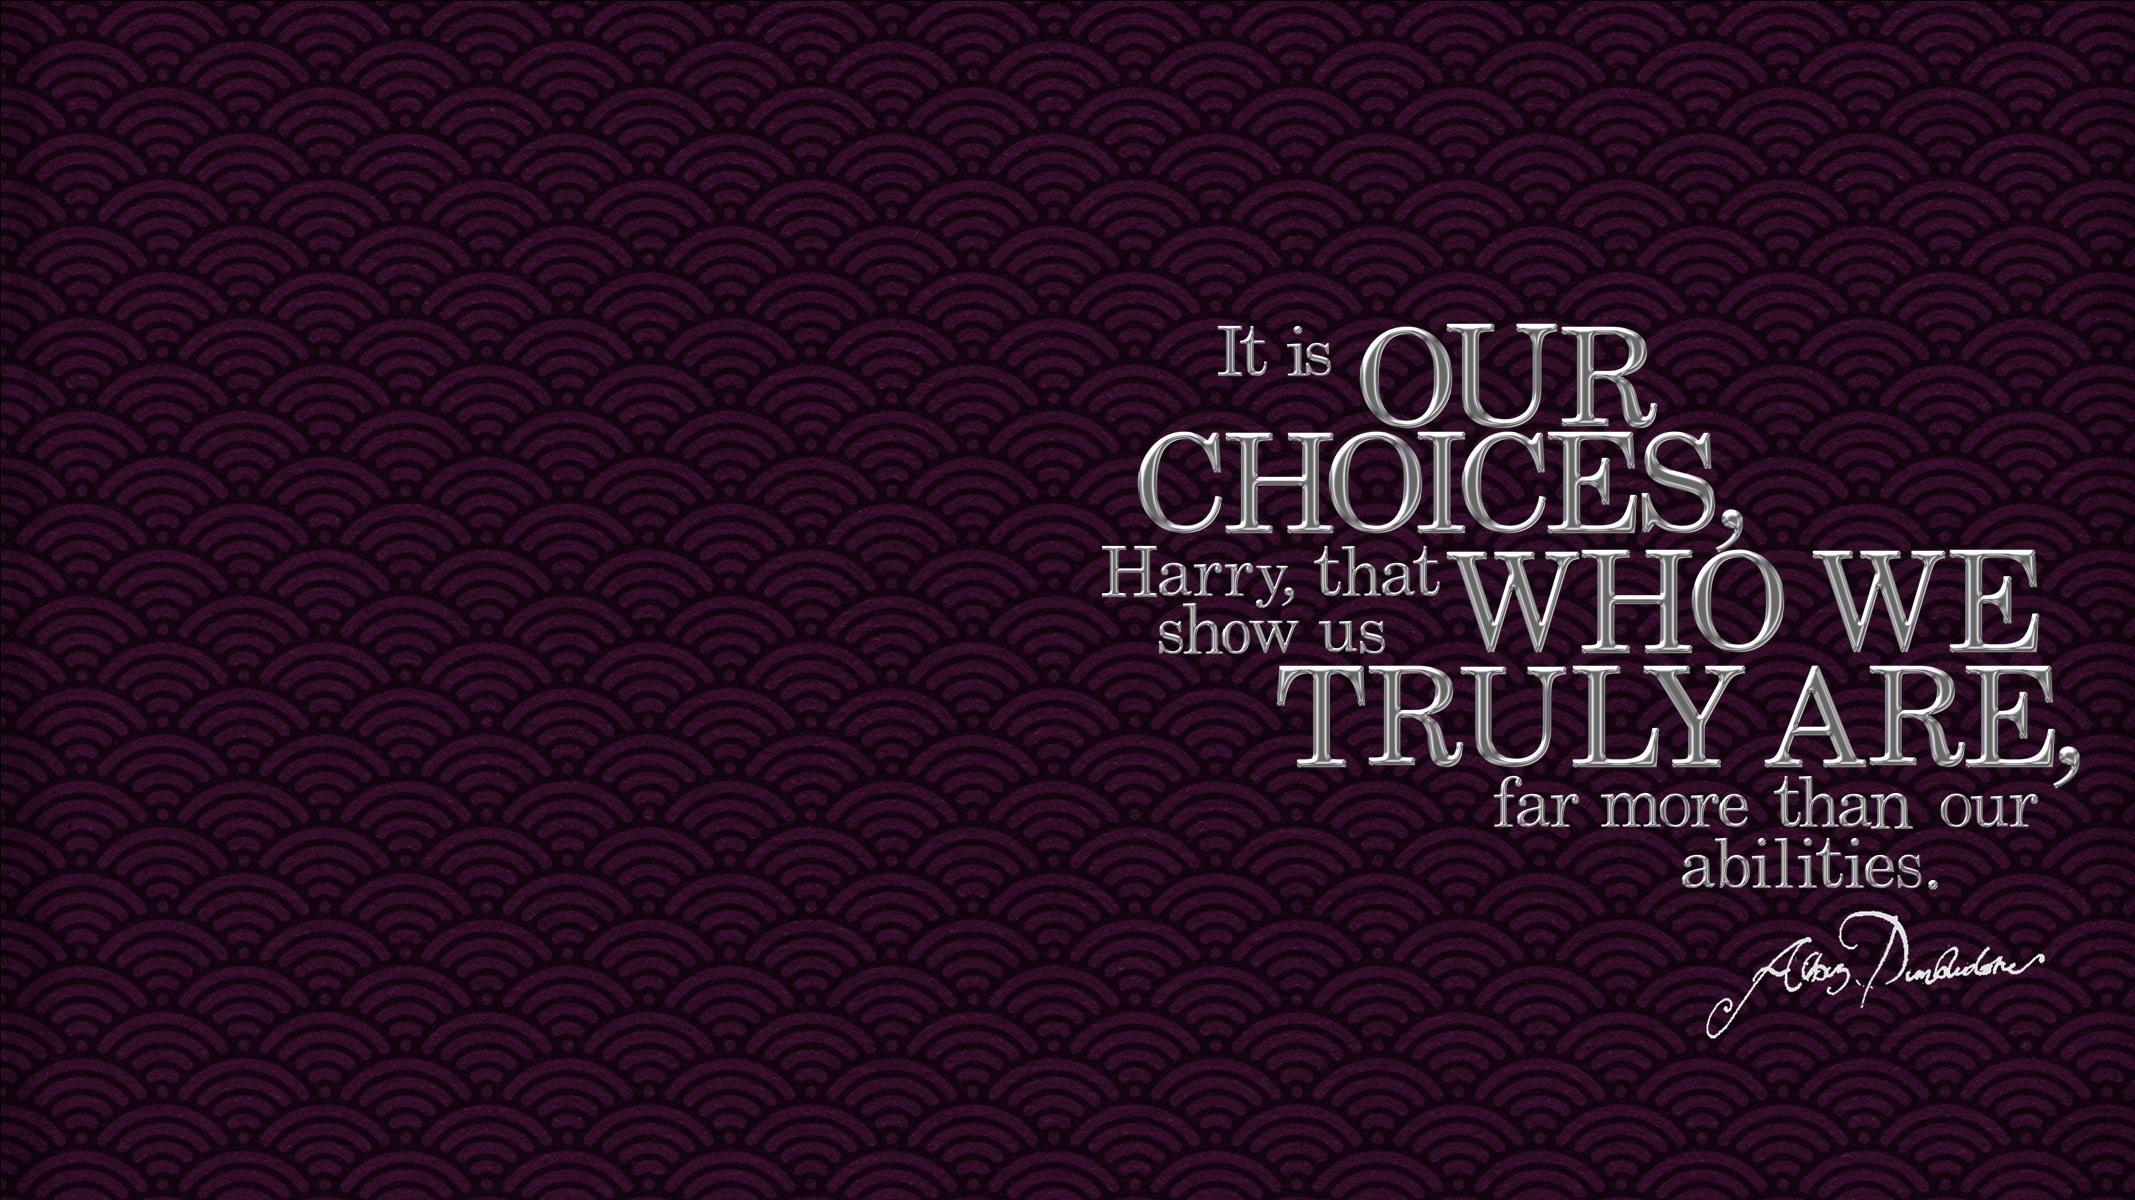 Dumbledore quote widescreen wallpapers Widescreen Wallpapers made by